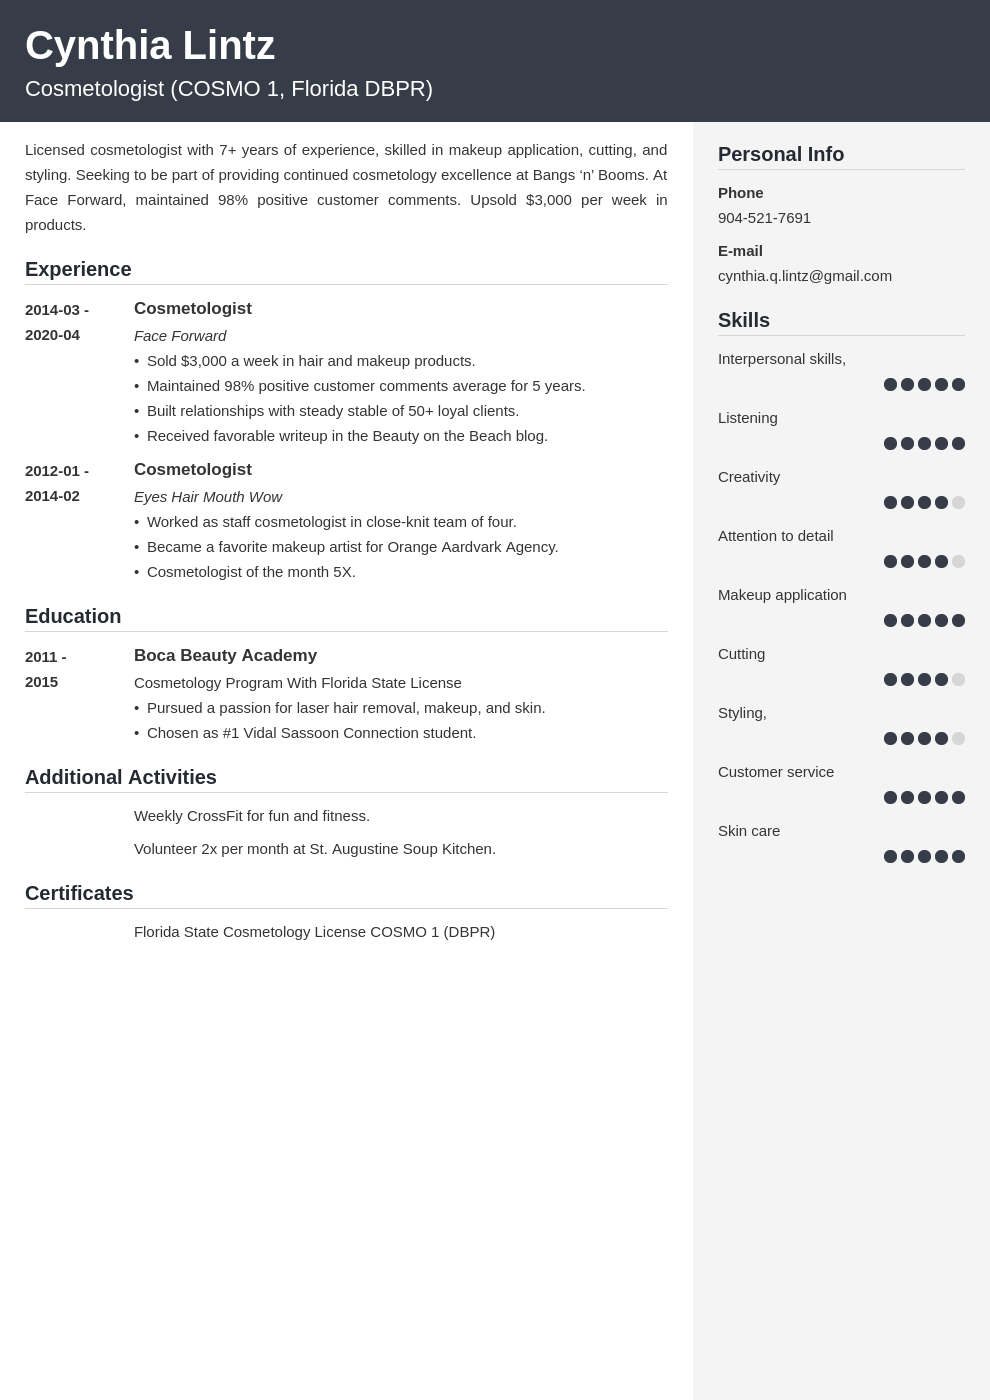 Cosmetologist Resume Samples (Cosmetology Skills Included)